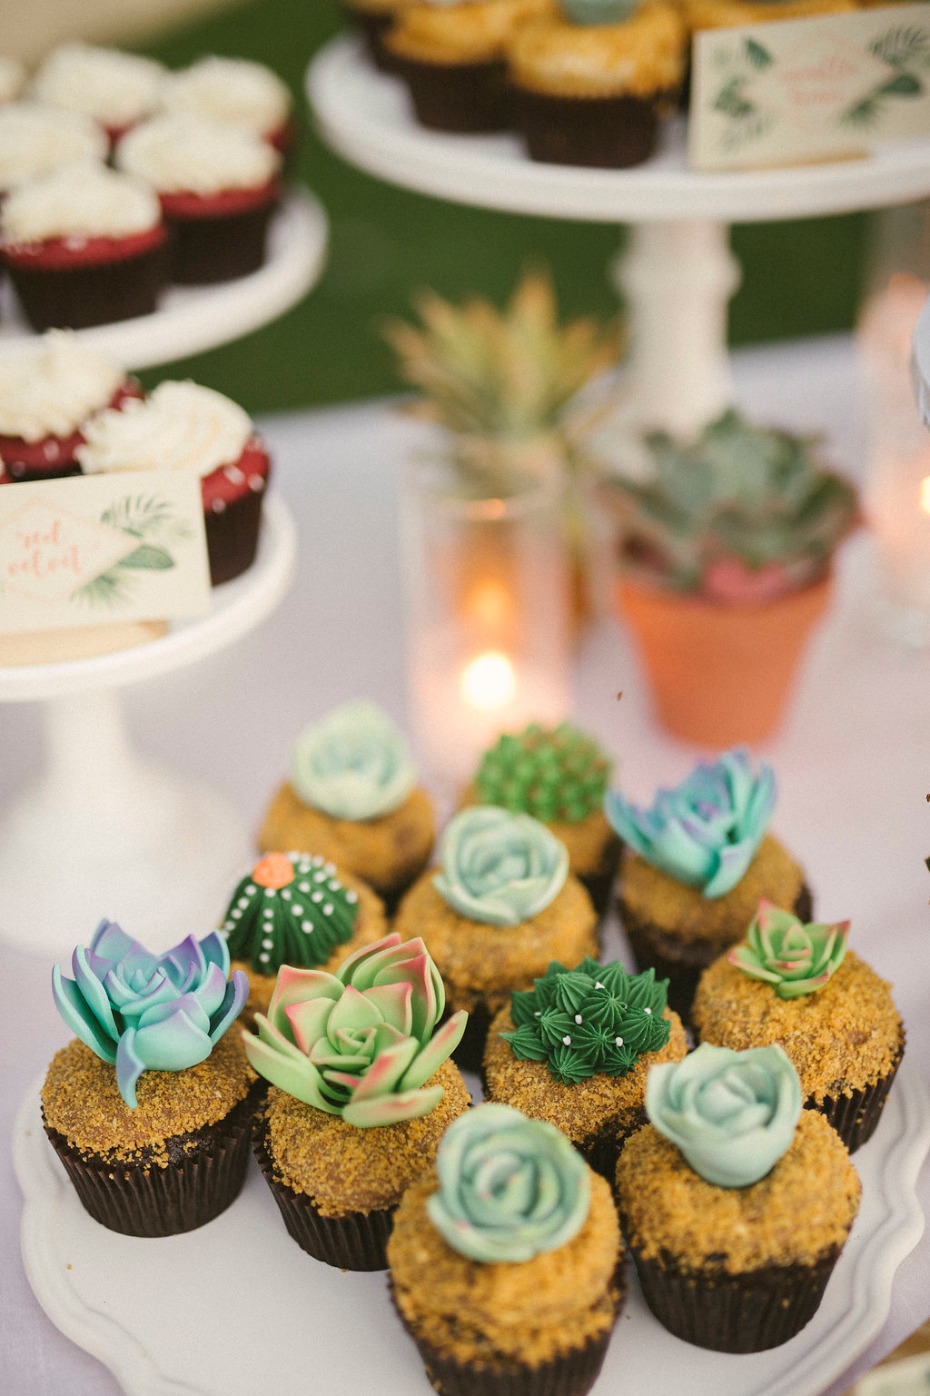 Succulent and cacti cupcakes <3